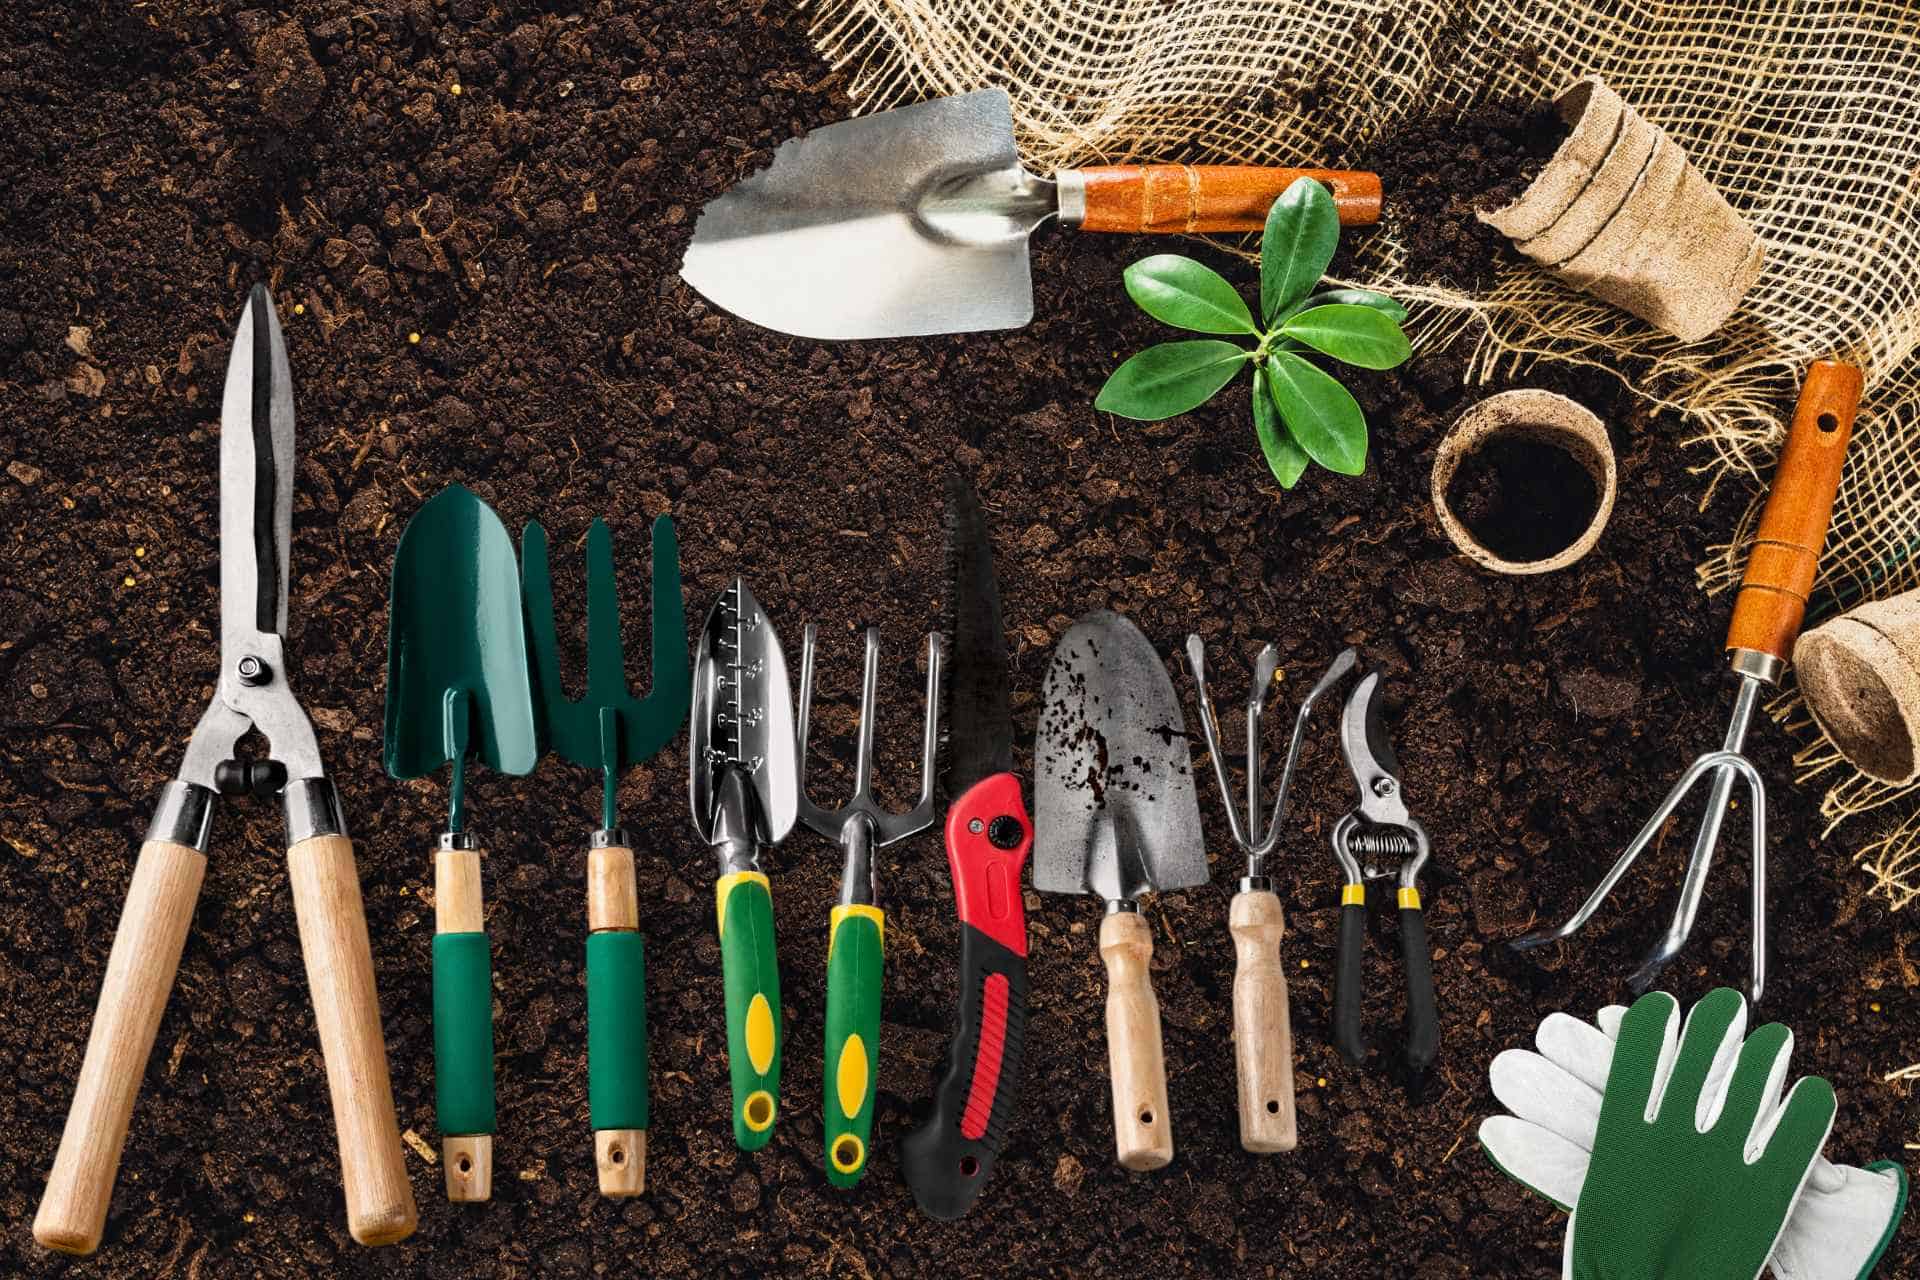 The Essential Guide to Choosing the Best Garden Tool Set